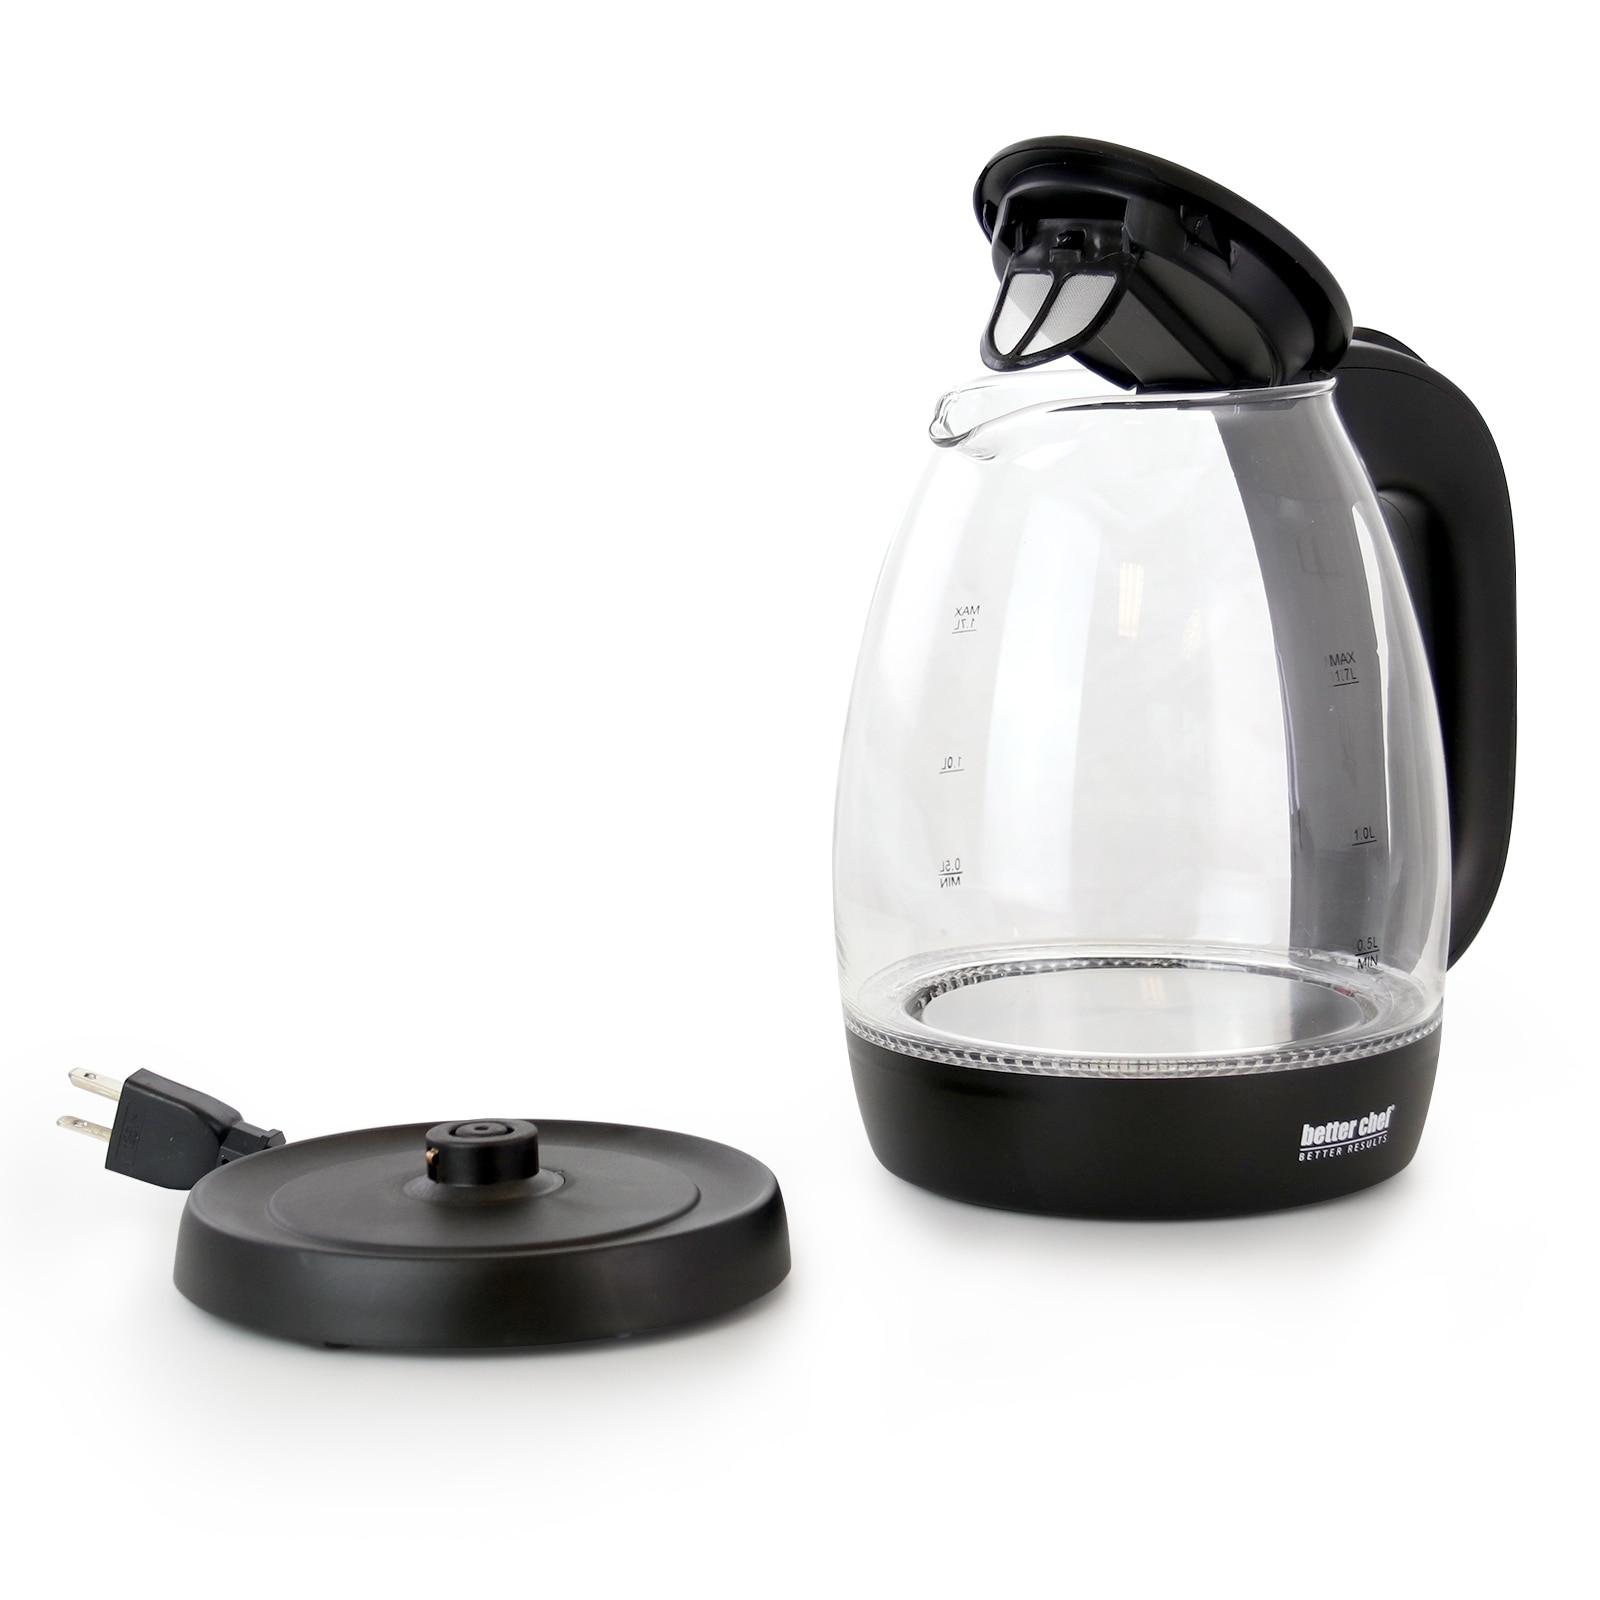 https://ak1.ostkcdn.com/images/products/is/images/direct/49ce734882cf93a7bb151ec73055cdbf3ad1799e/Better-Chef-1.7L-Cordless-Electric-Glass-Tea-Kettle.jpg